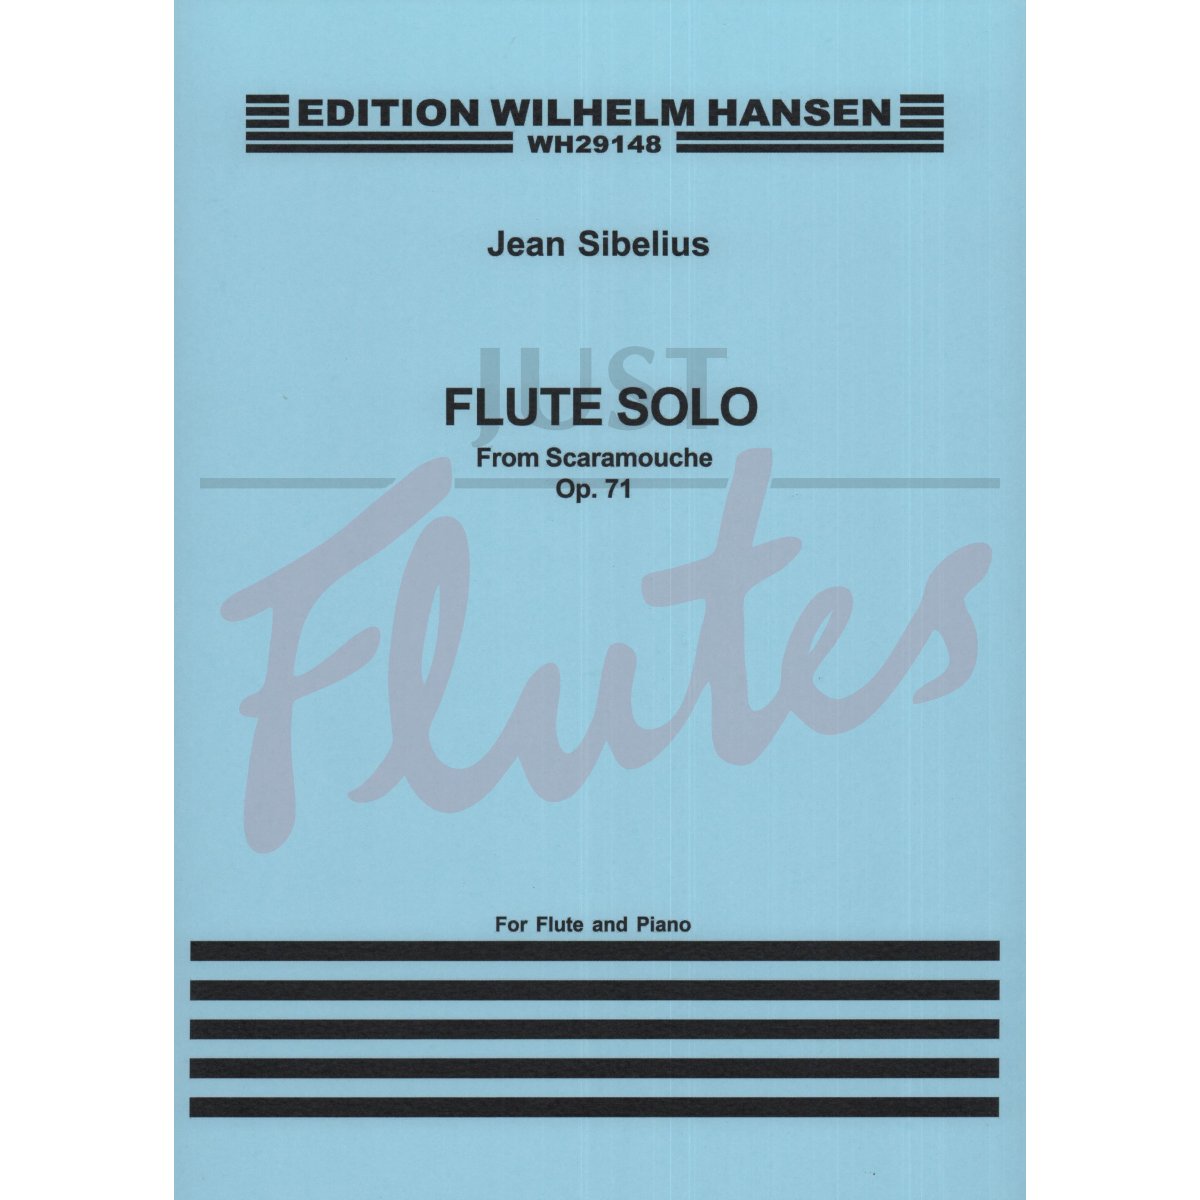 Flute Solo from Scaramouche for Flute and Piano